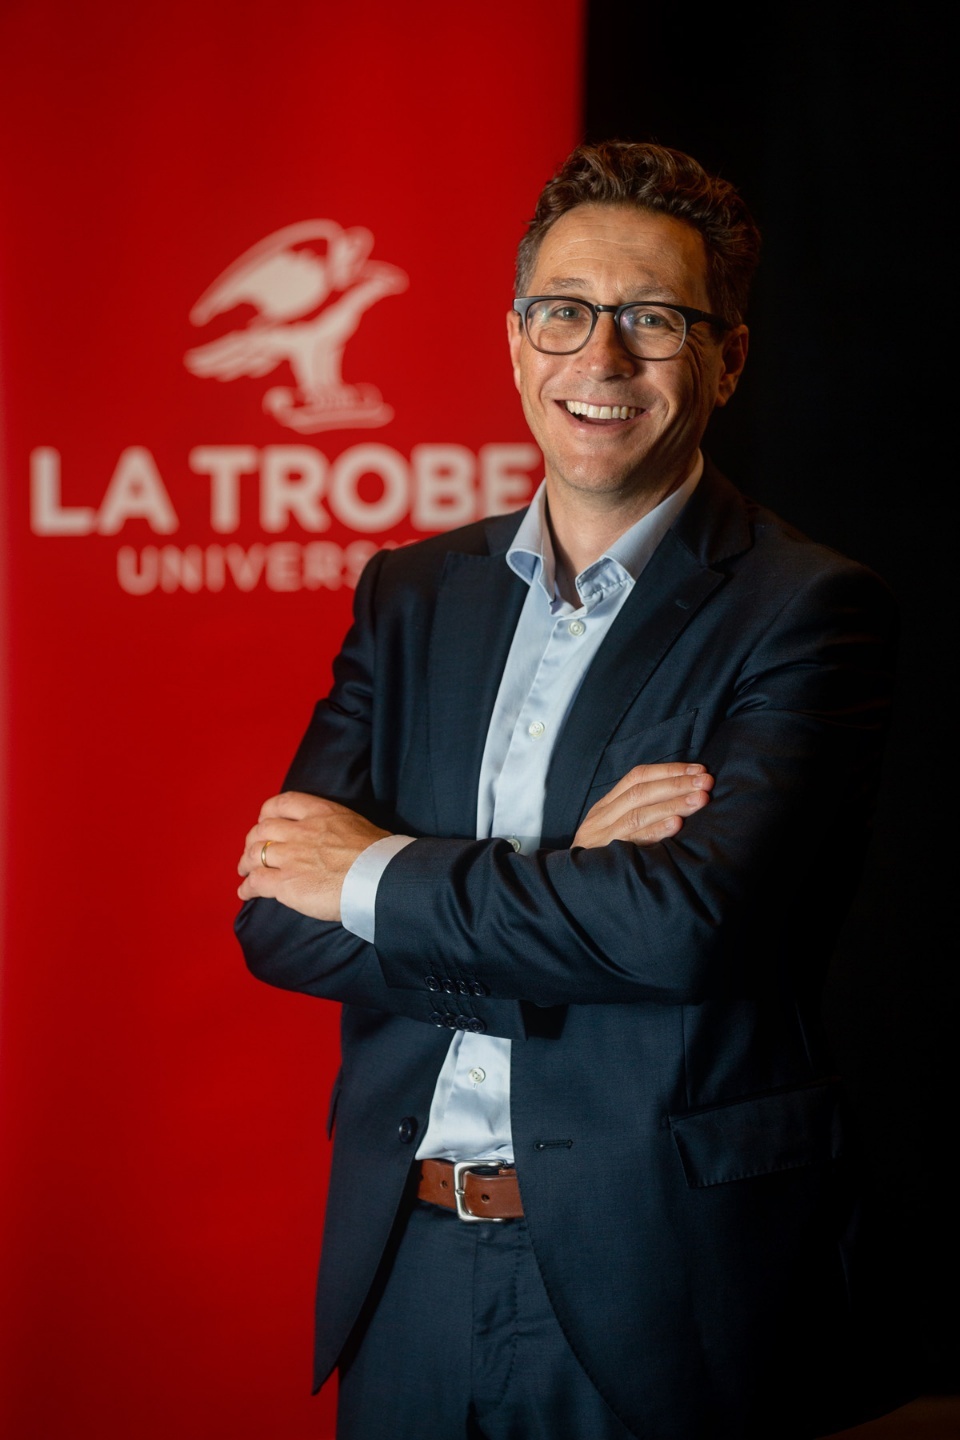 Professor Nick Bisley, a dean and head of the School of Humanities and Social Sciences and professor of International Relations at La Trobe University, Australia